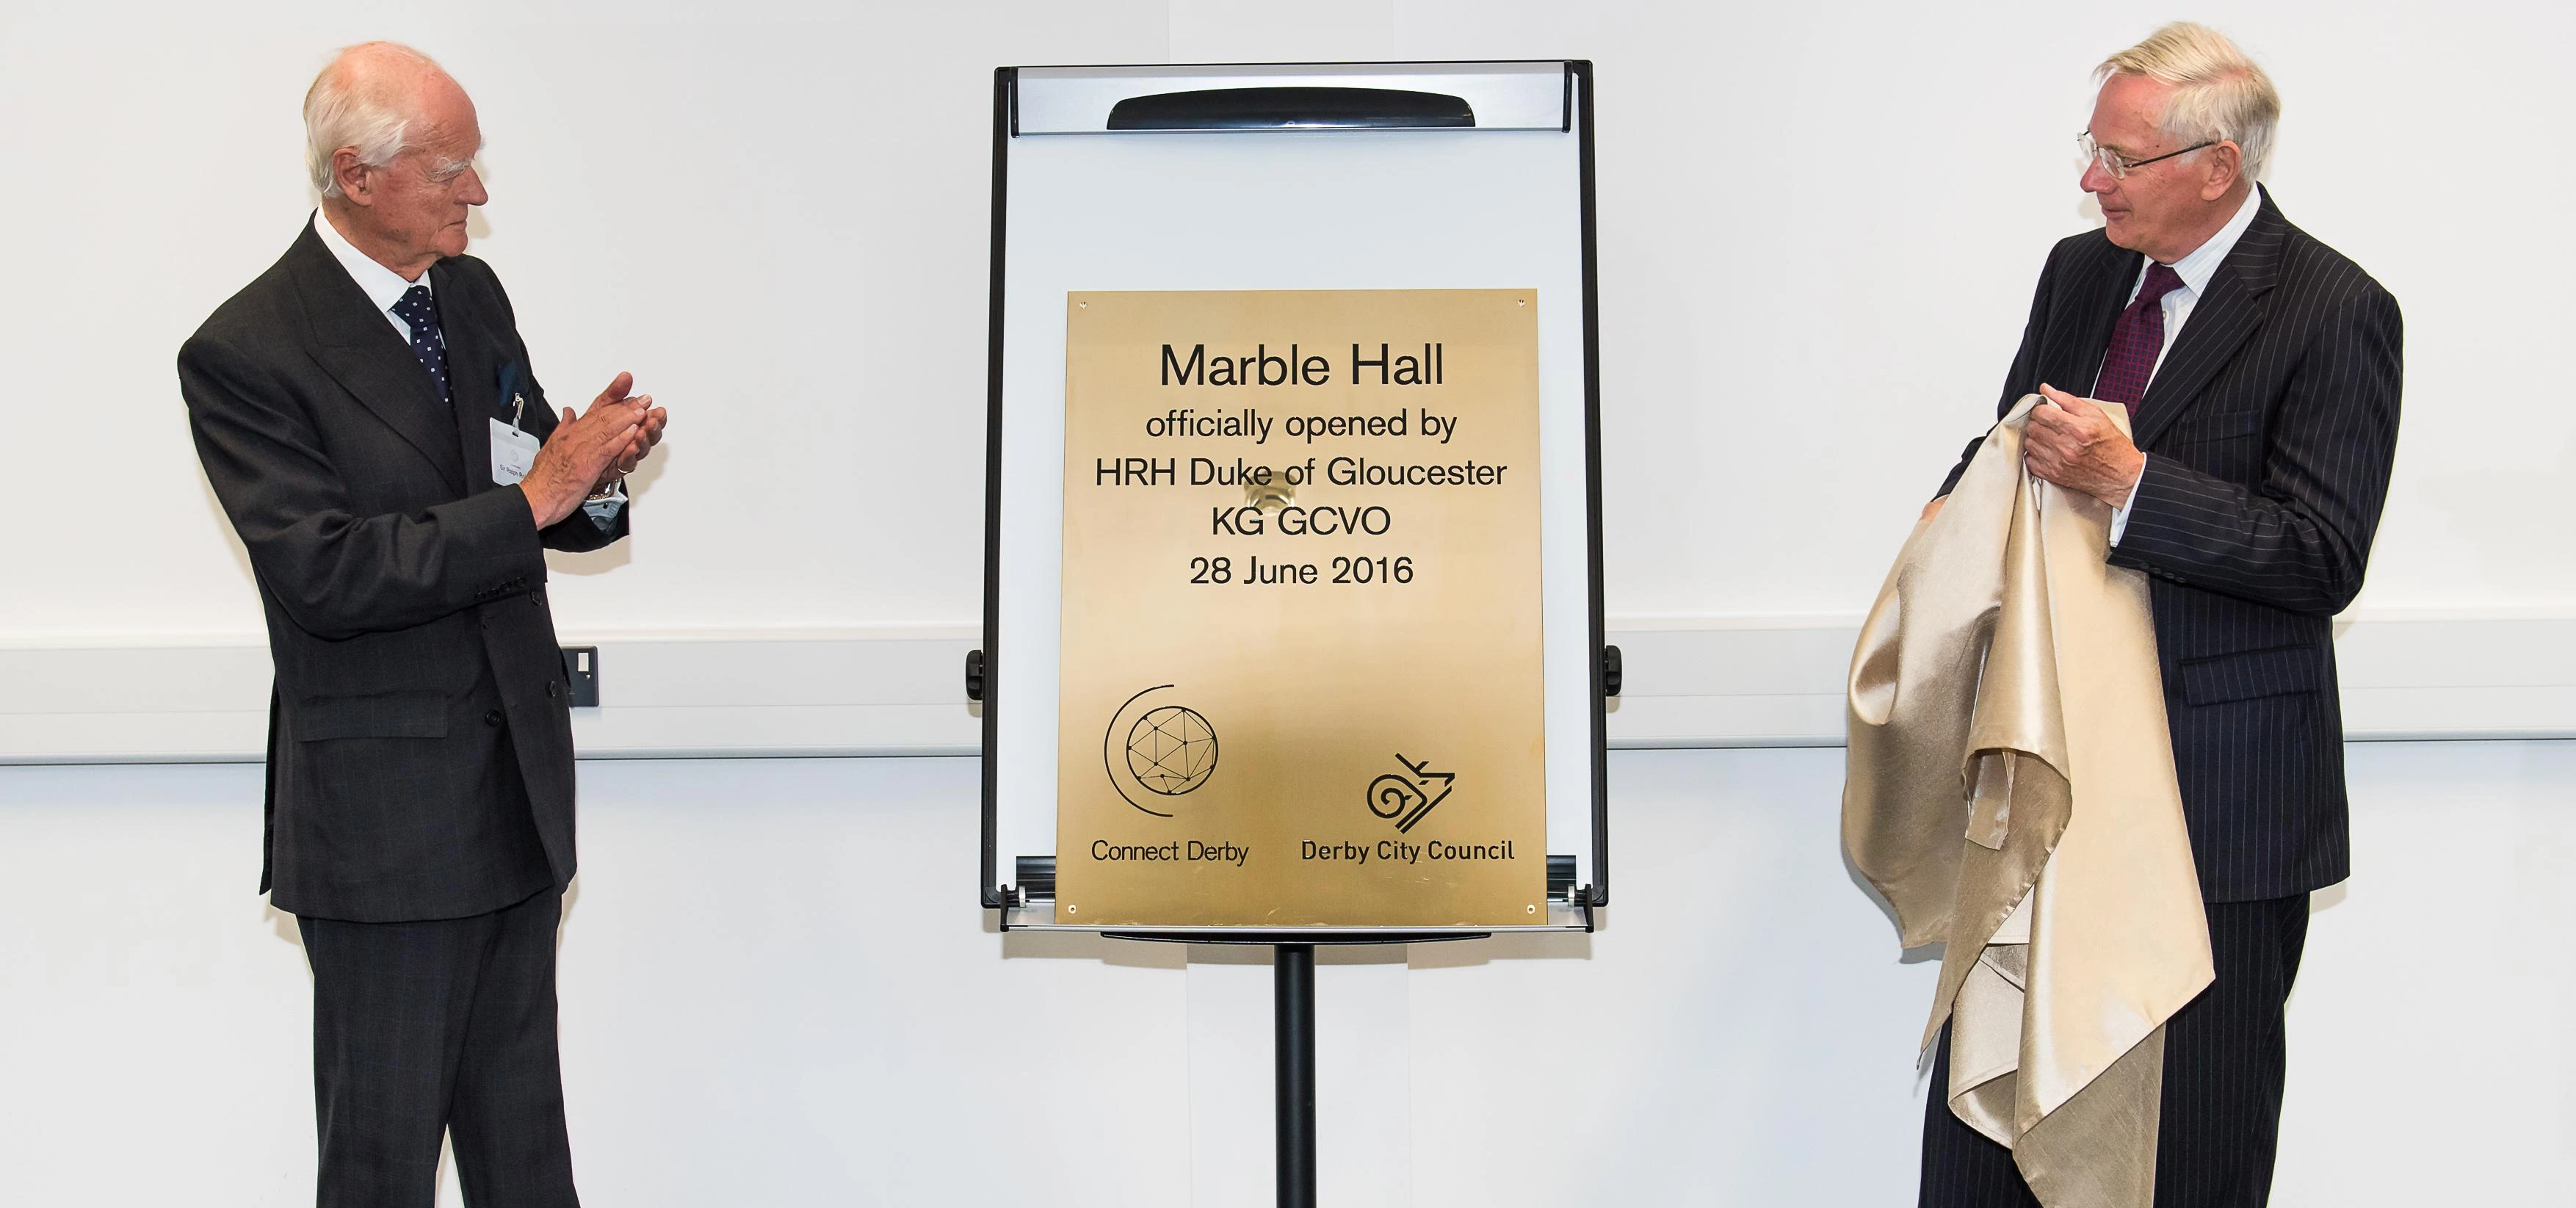 HRH Duke of Gloucester (right) and Sir Ralph Robins (left) pictured unveiling the Marble Hall plaque